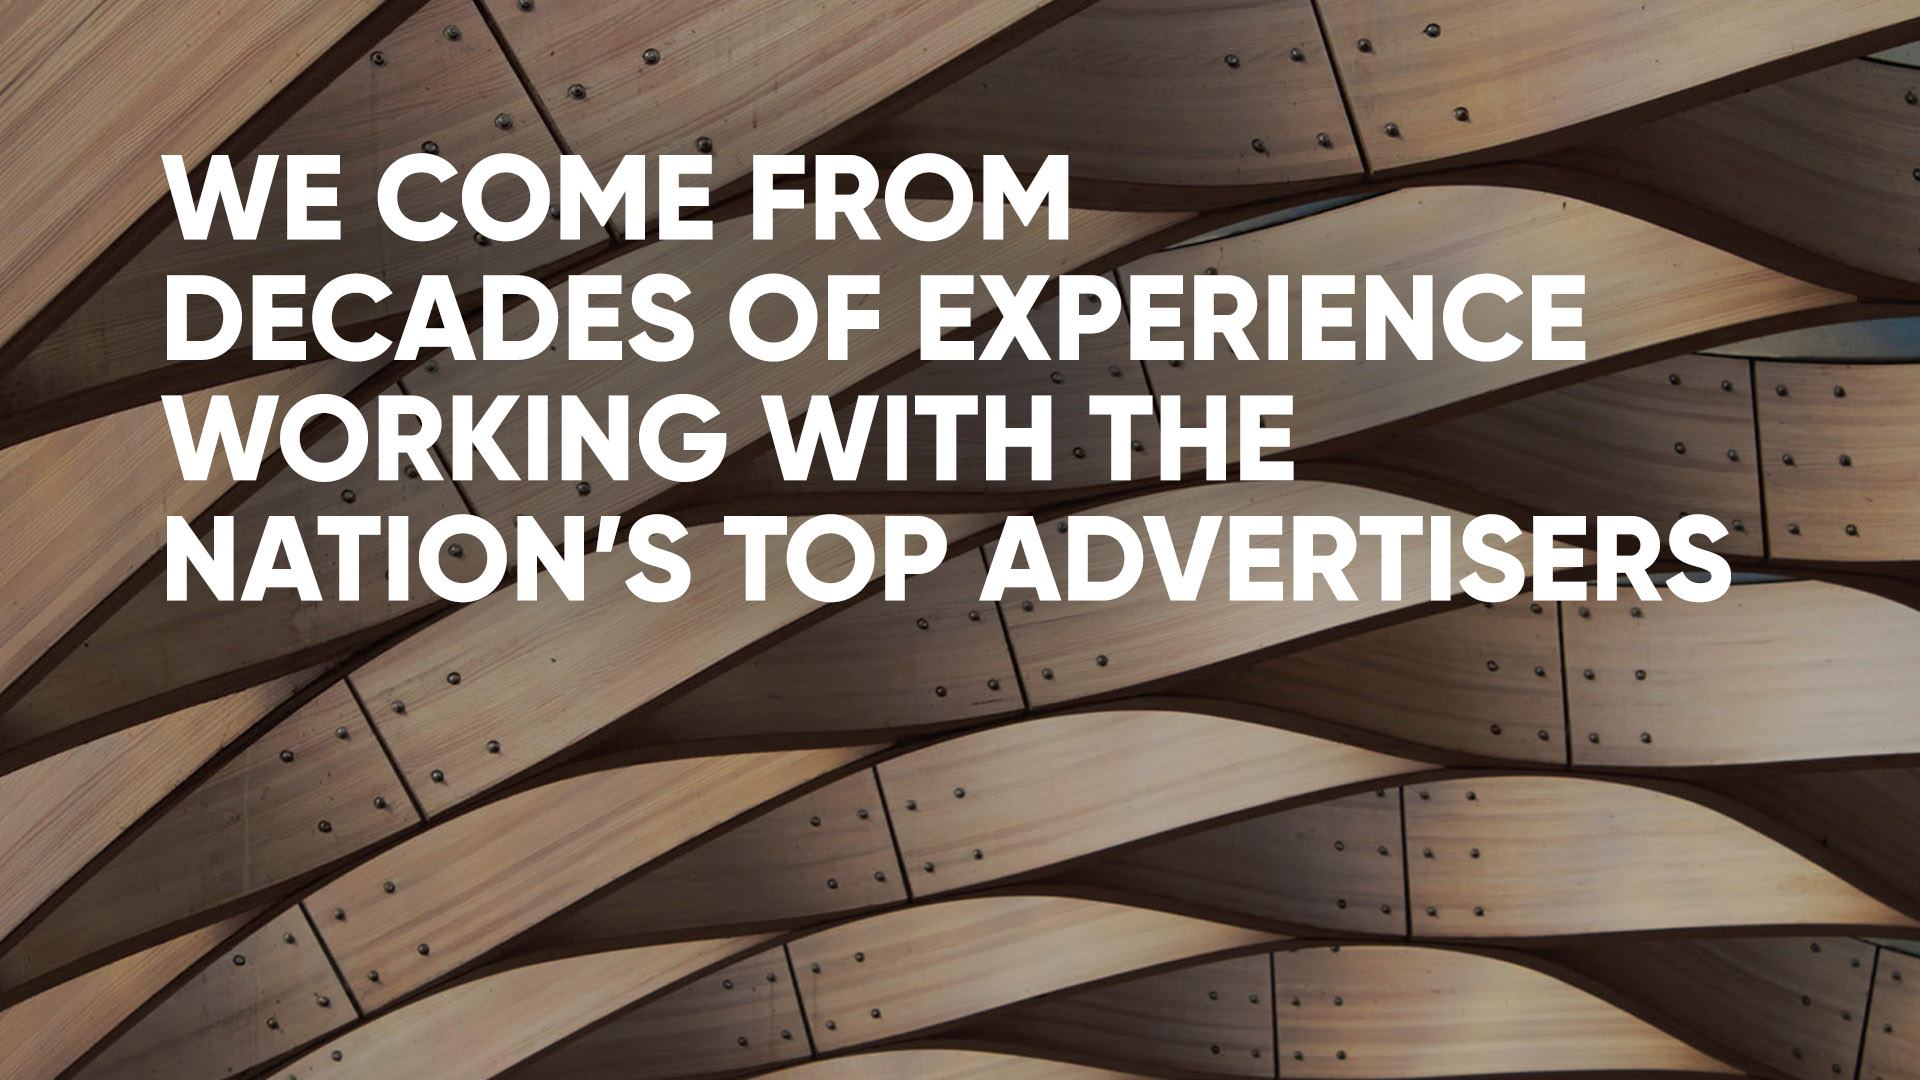 We come from decades of experience working with the nation's top advertisers